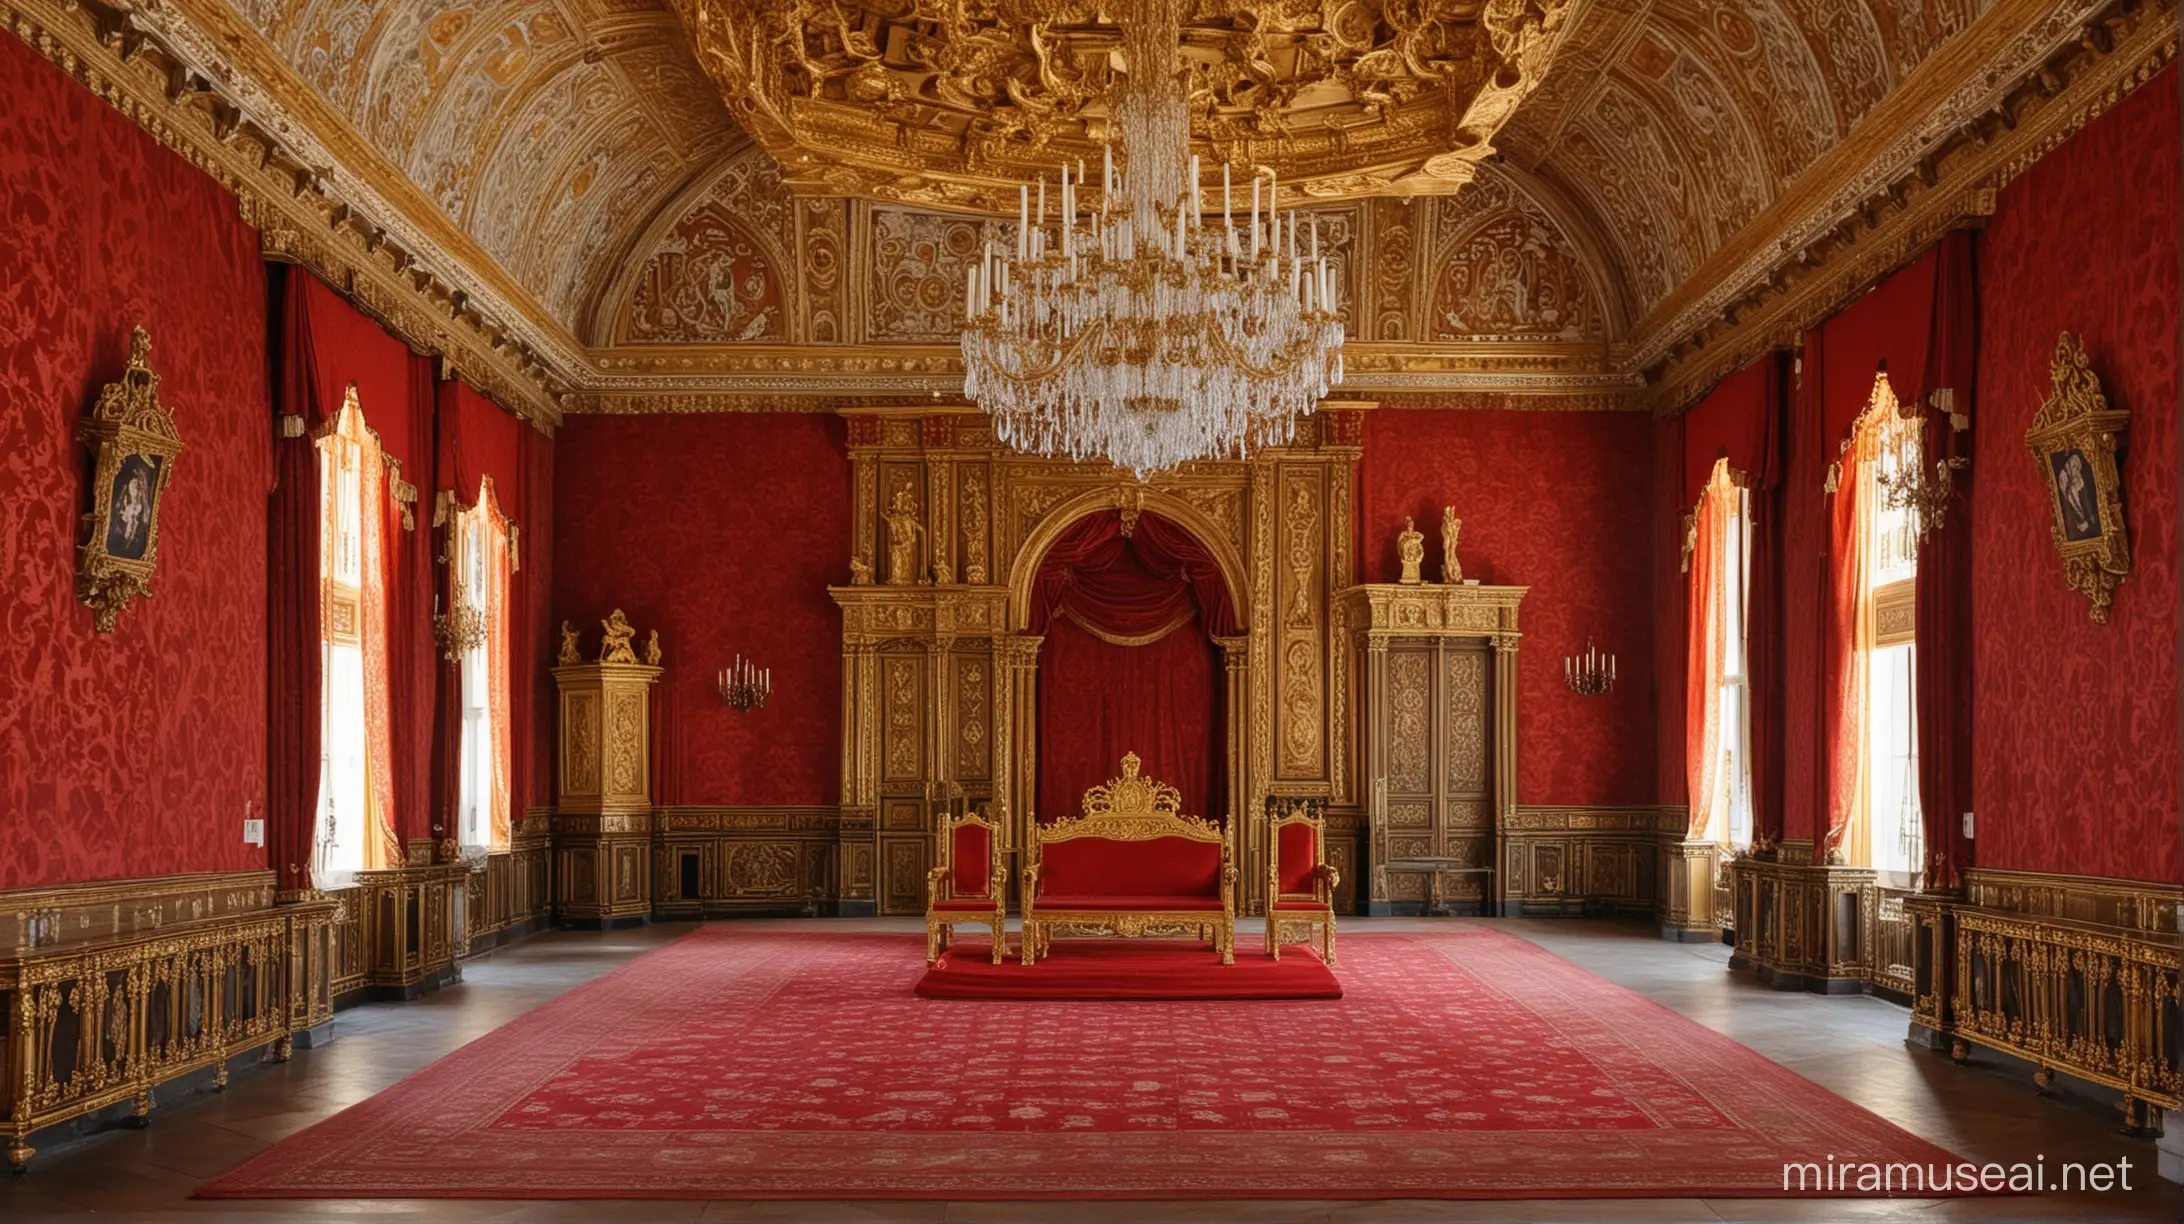 a rich throne hall decorated in shades of golden and red. It should remind if queen elizabeth I's time 